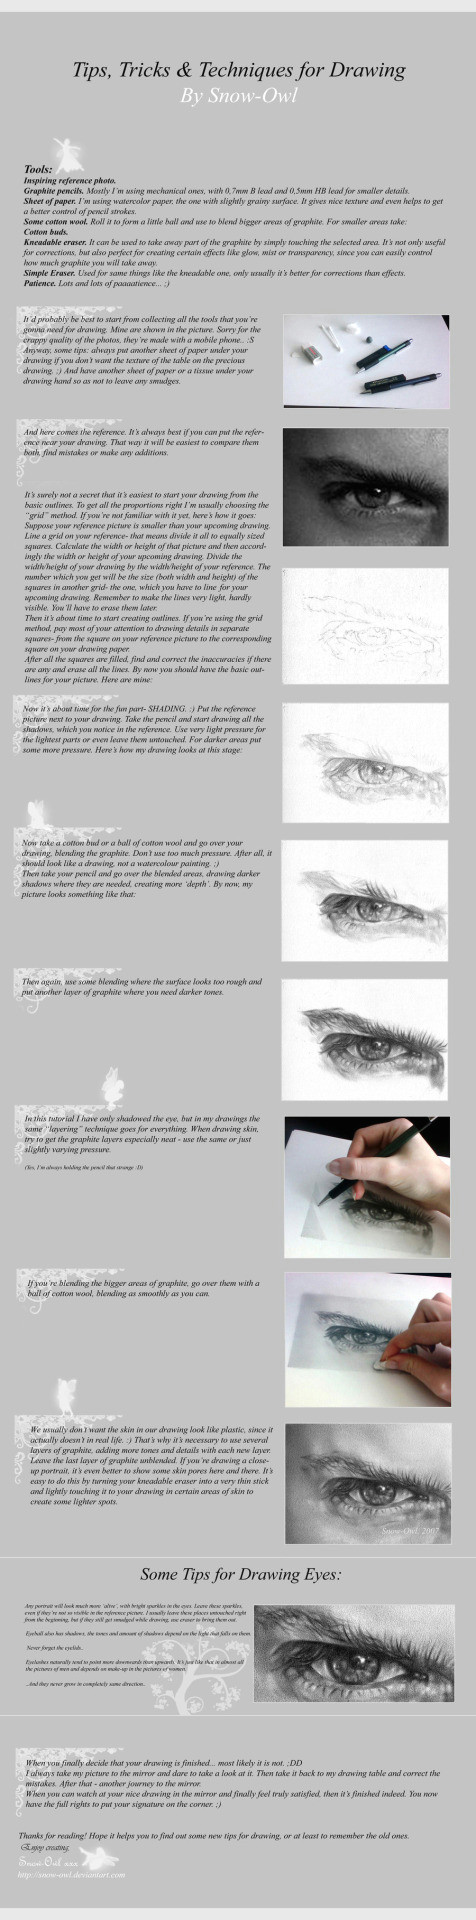 Bank Drawing Easy Drawing Tutorial by Snow Owl How to Draw Eyes Drawings